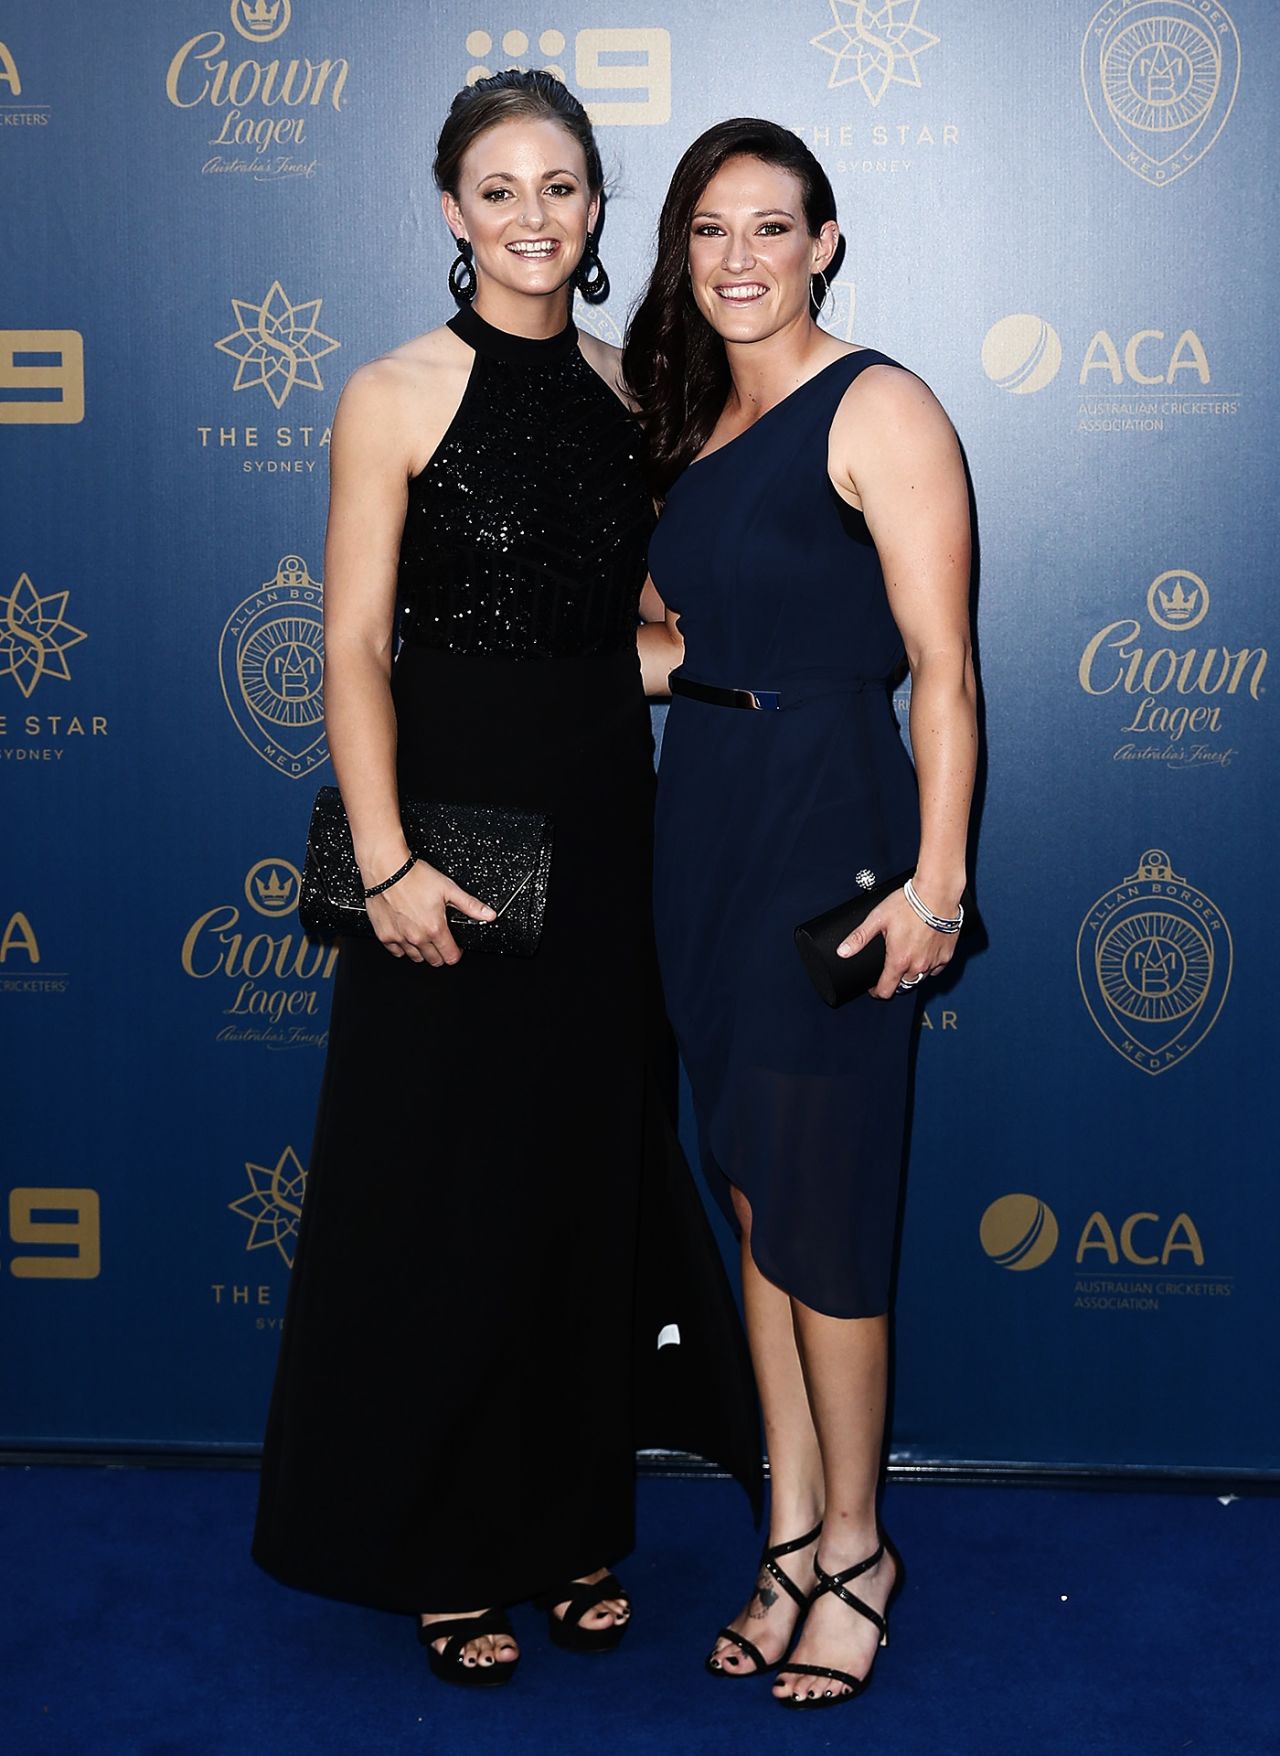 Megan Schutt (right) with her girlfriend Jess Hollyoake at the Allan Border Medal, Sydney, January 23, 2017